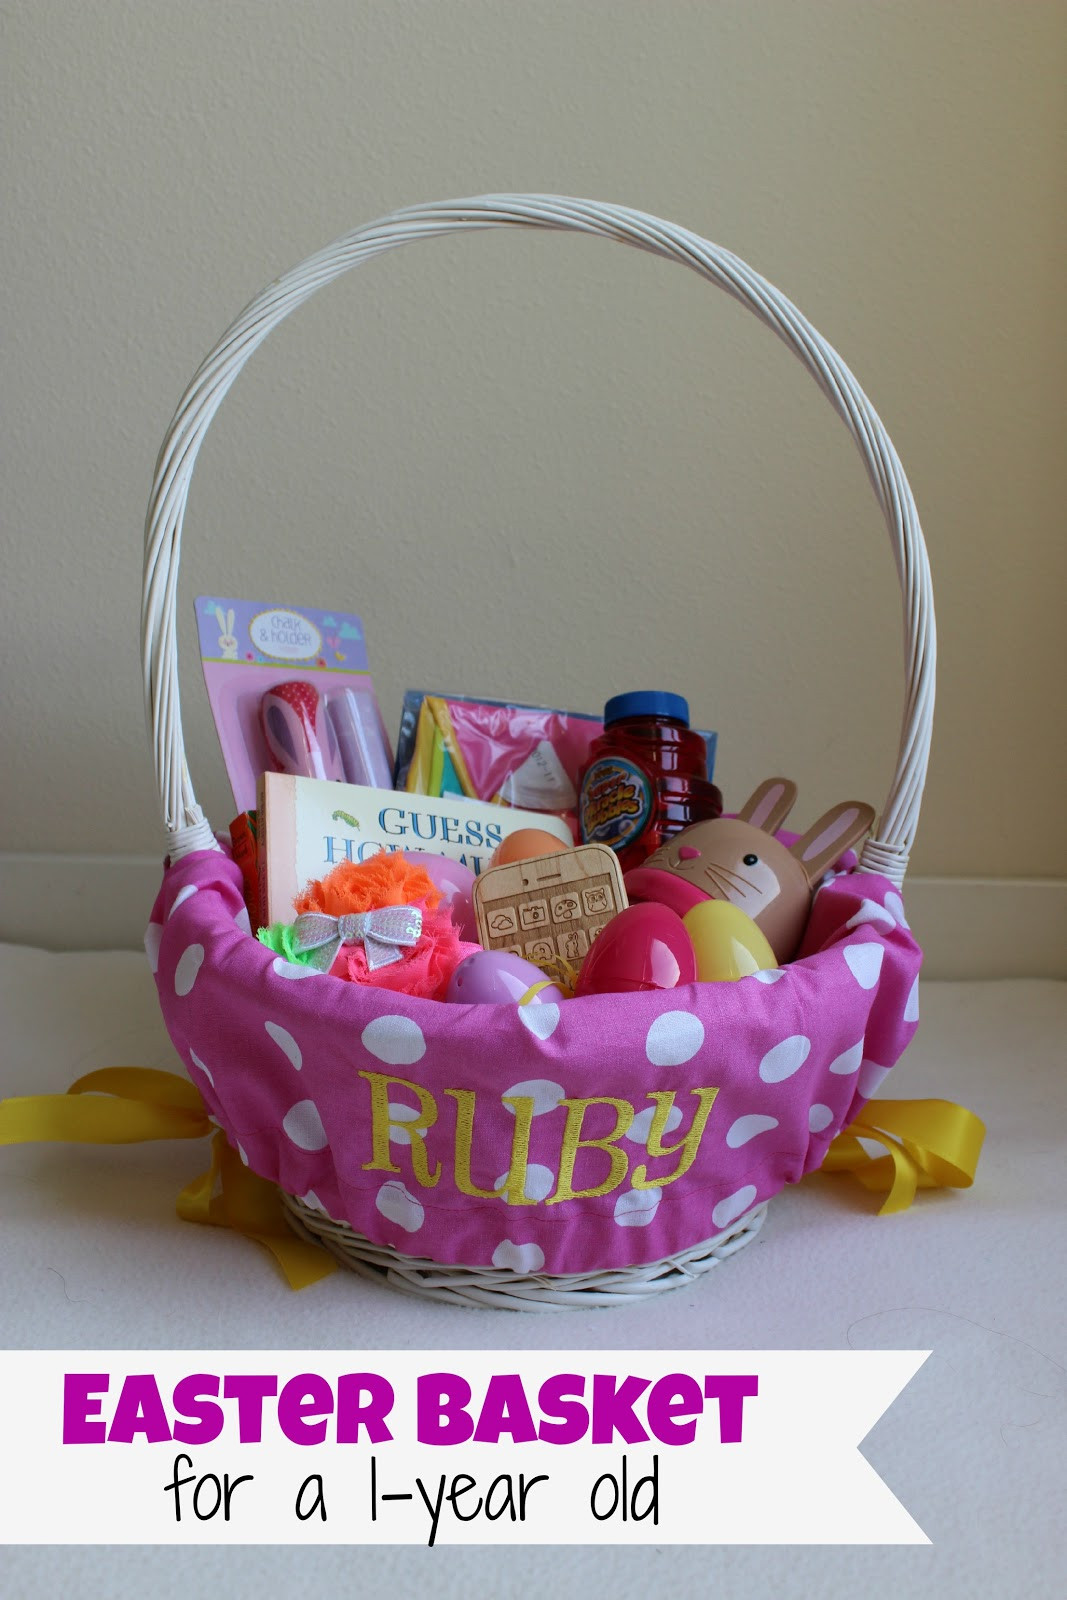 Easter Basket Ideas For 12 Year Old Boy
 We G Three Ruby s First Easter Basket